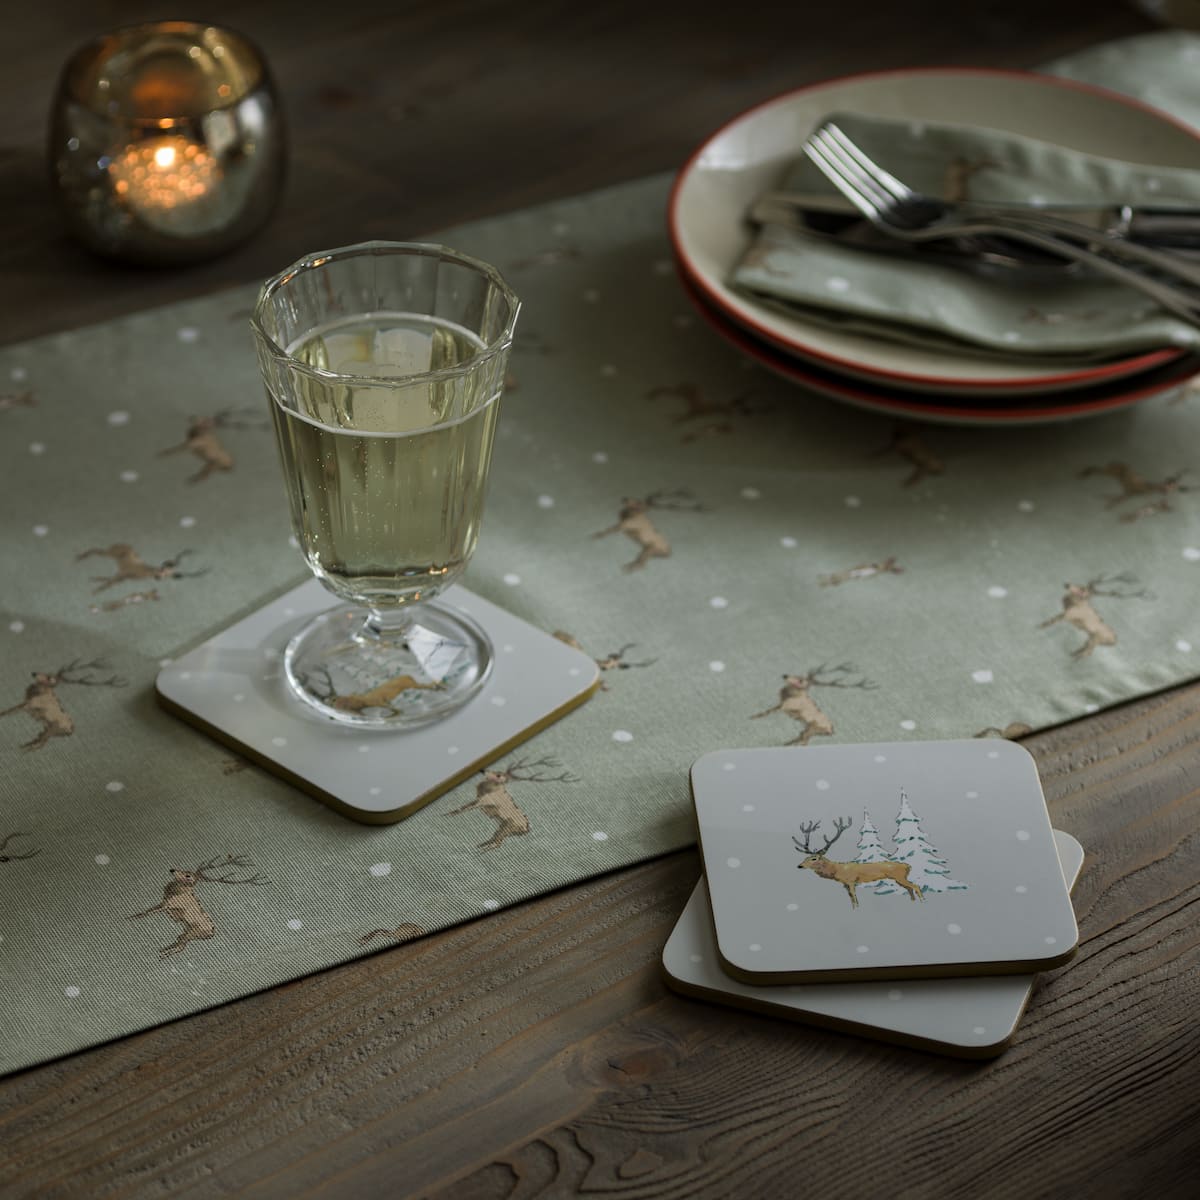 Christmas Stags Coasters (Set of 4)